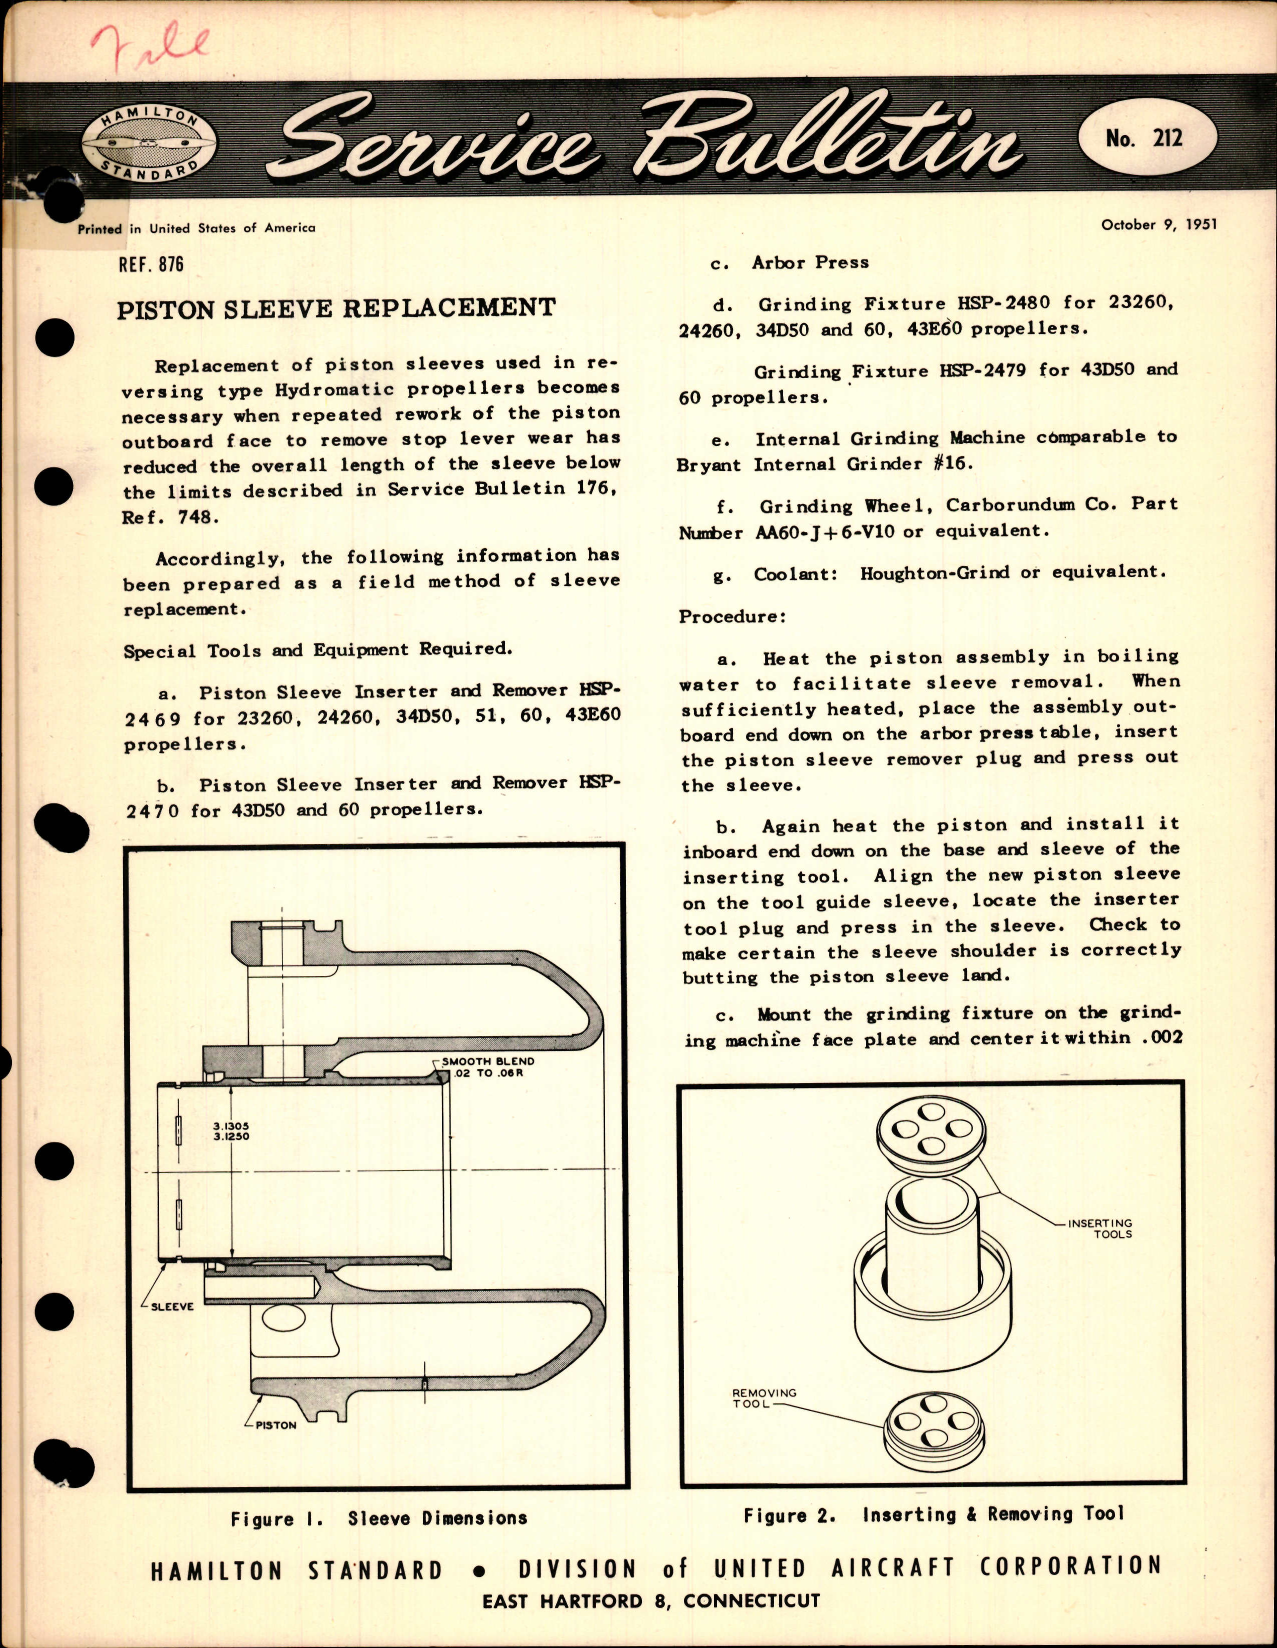 Sample page 1 from AirCorps Library document: Piston Sleeve Replacement, Ref 876